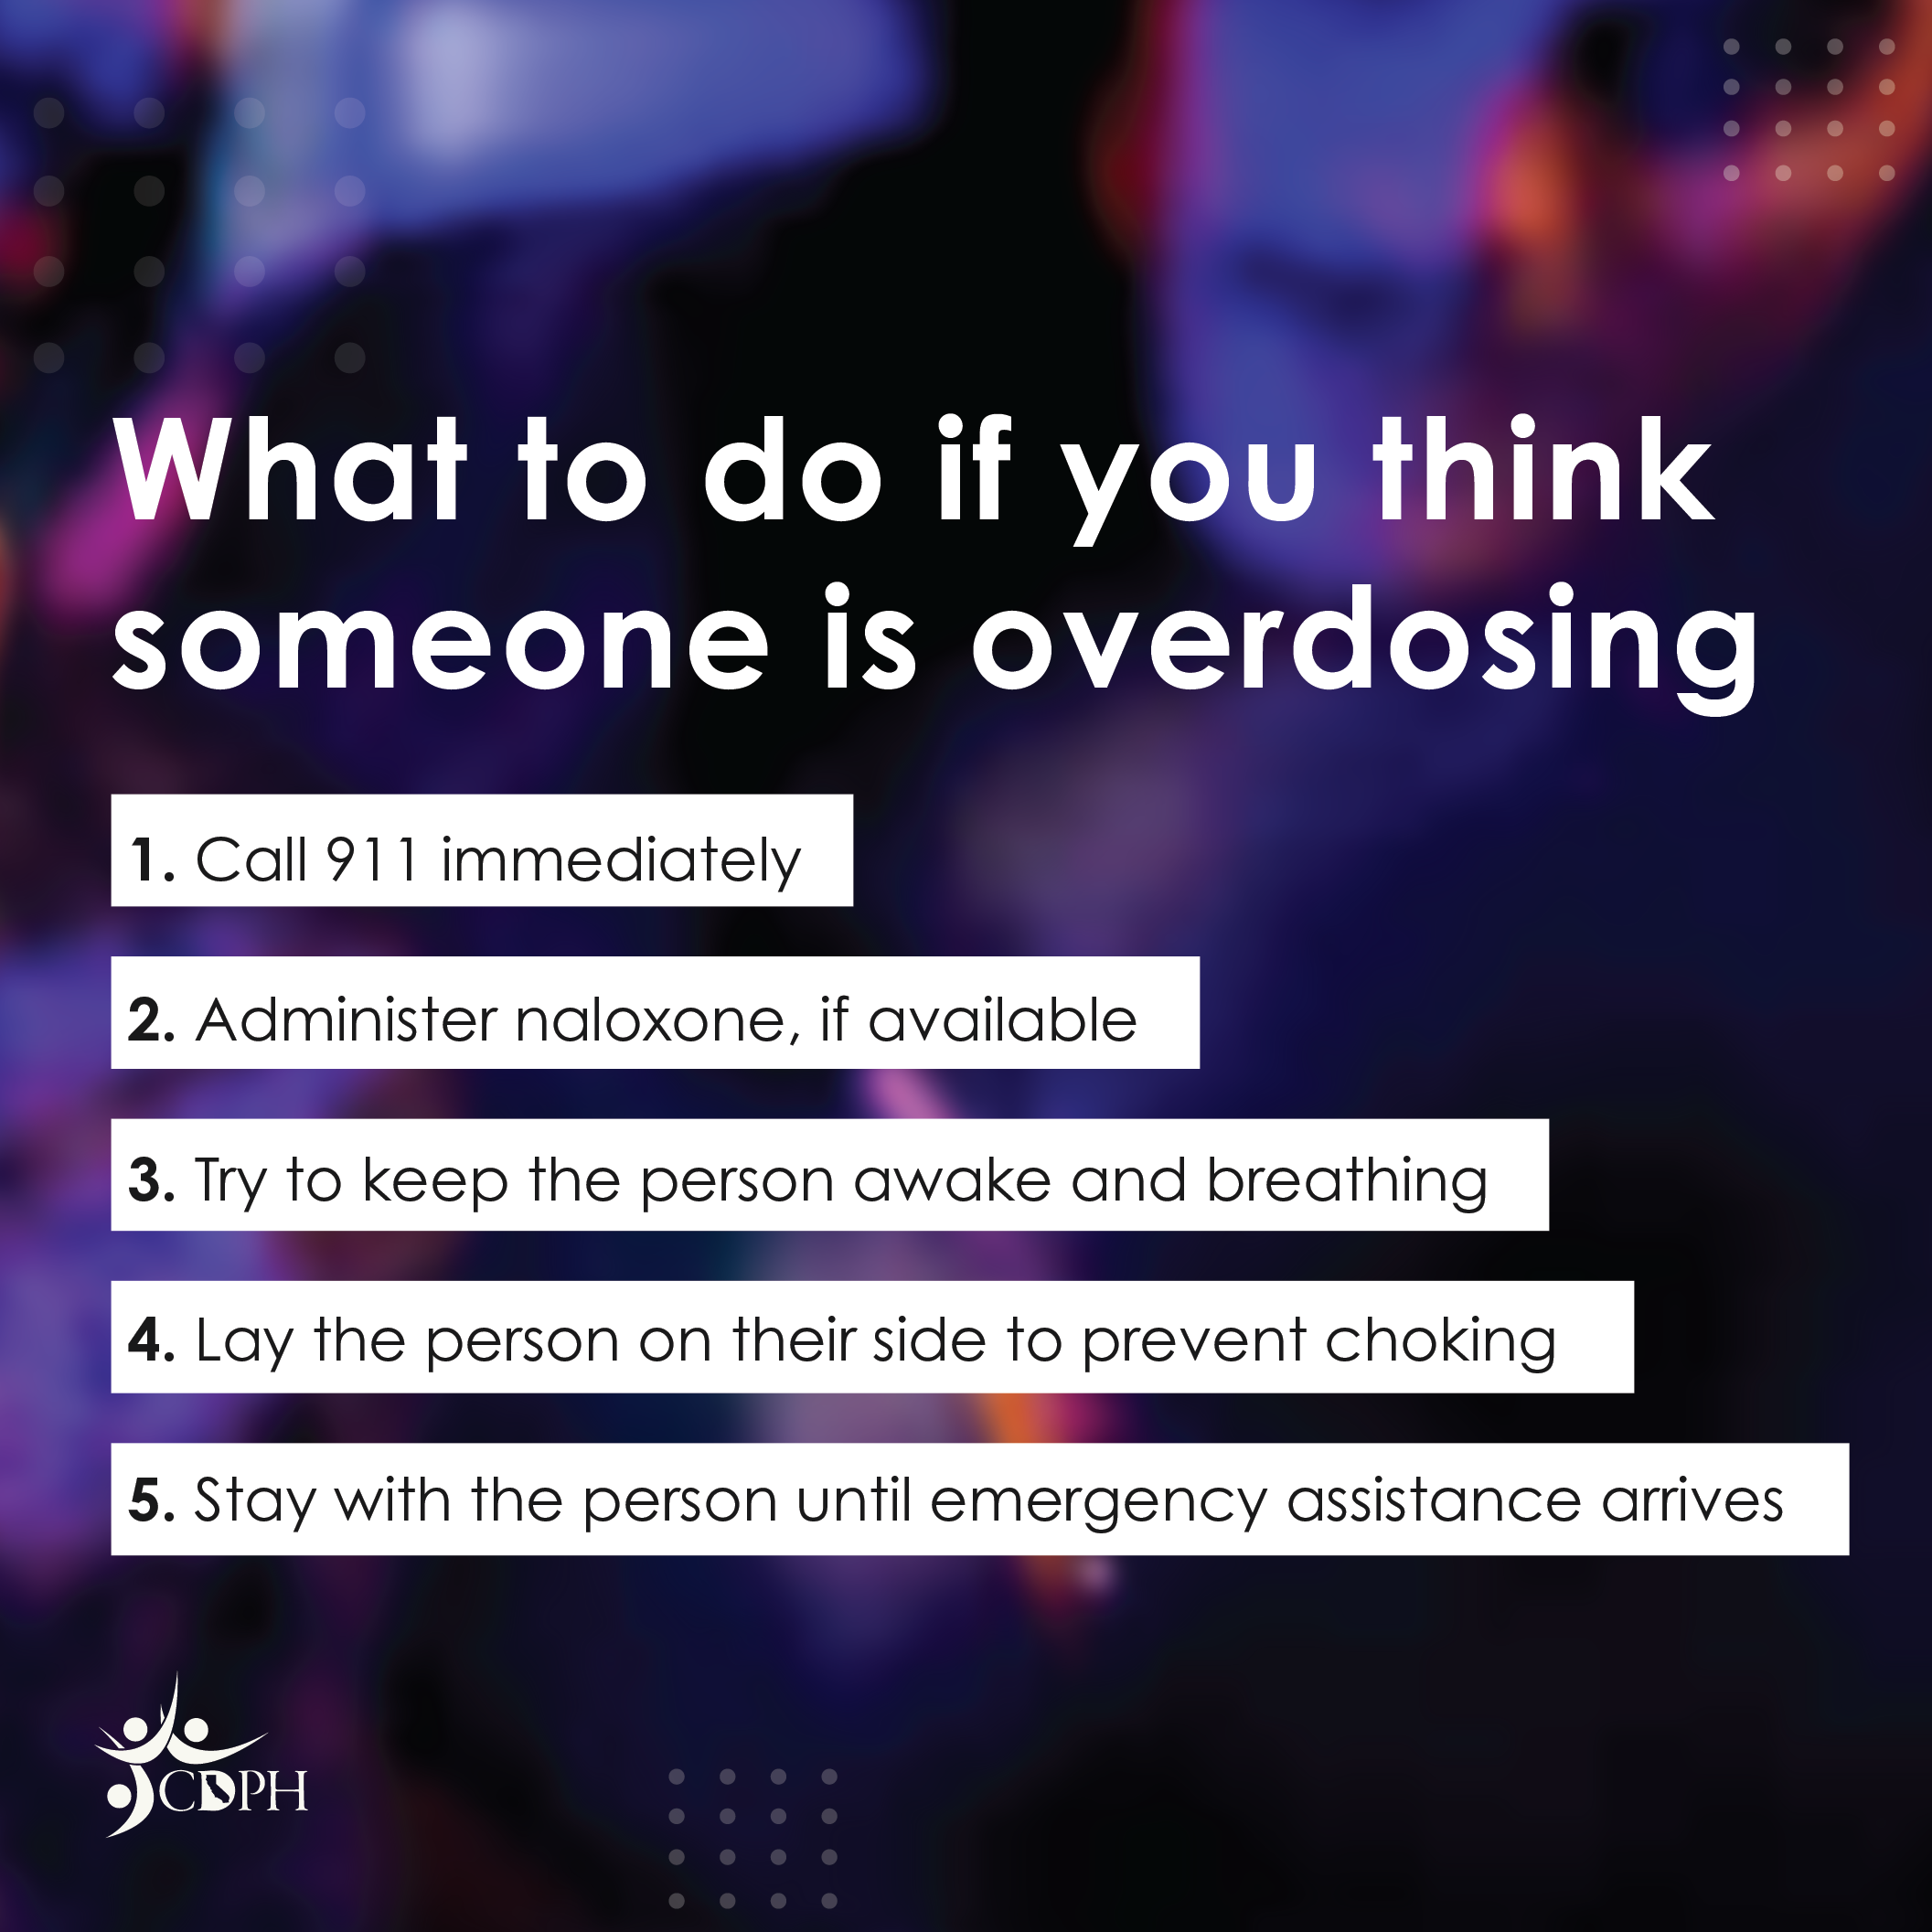 What to do if you think someone is overdosing